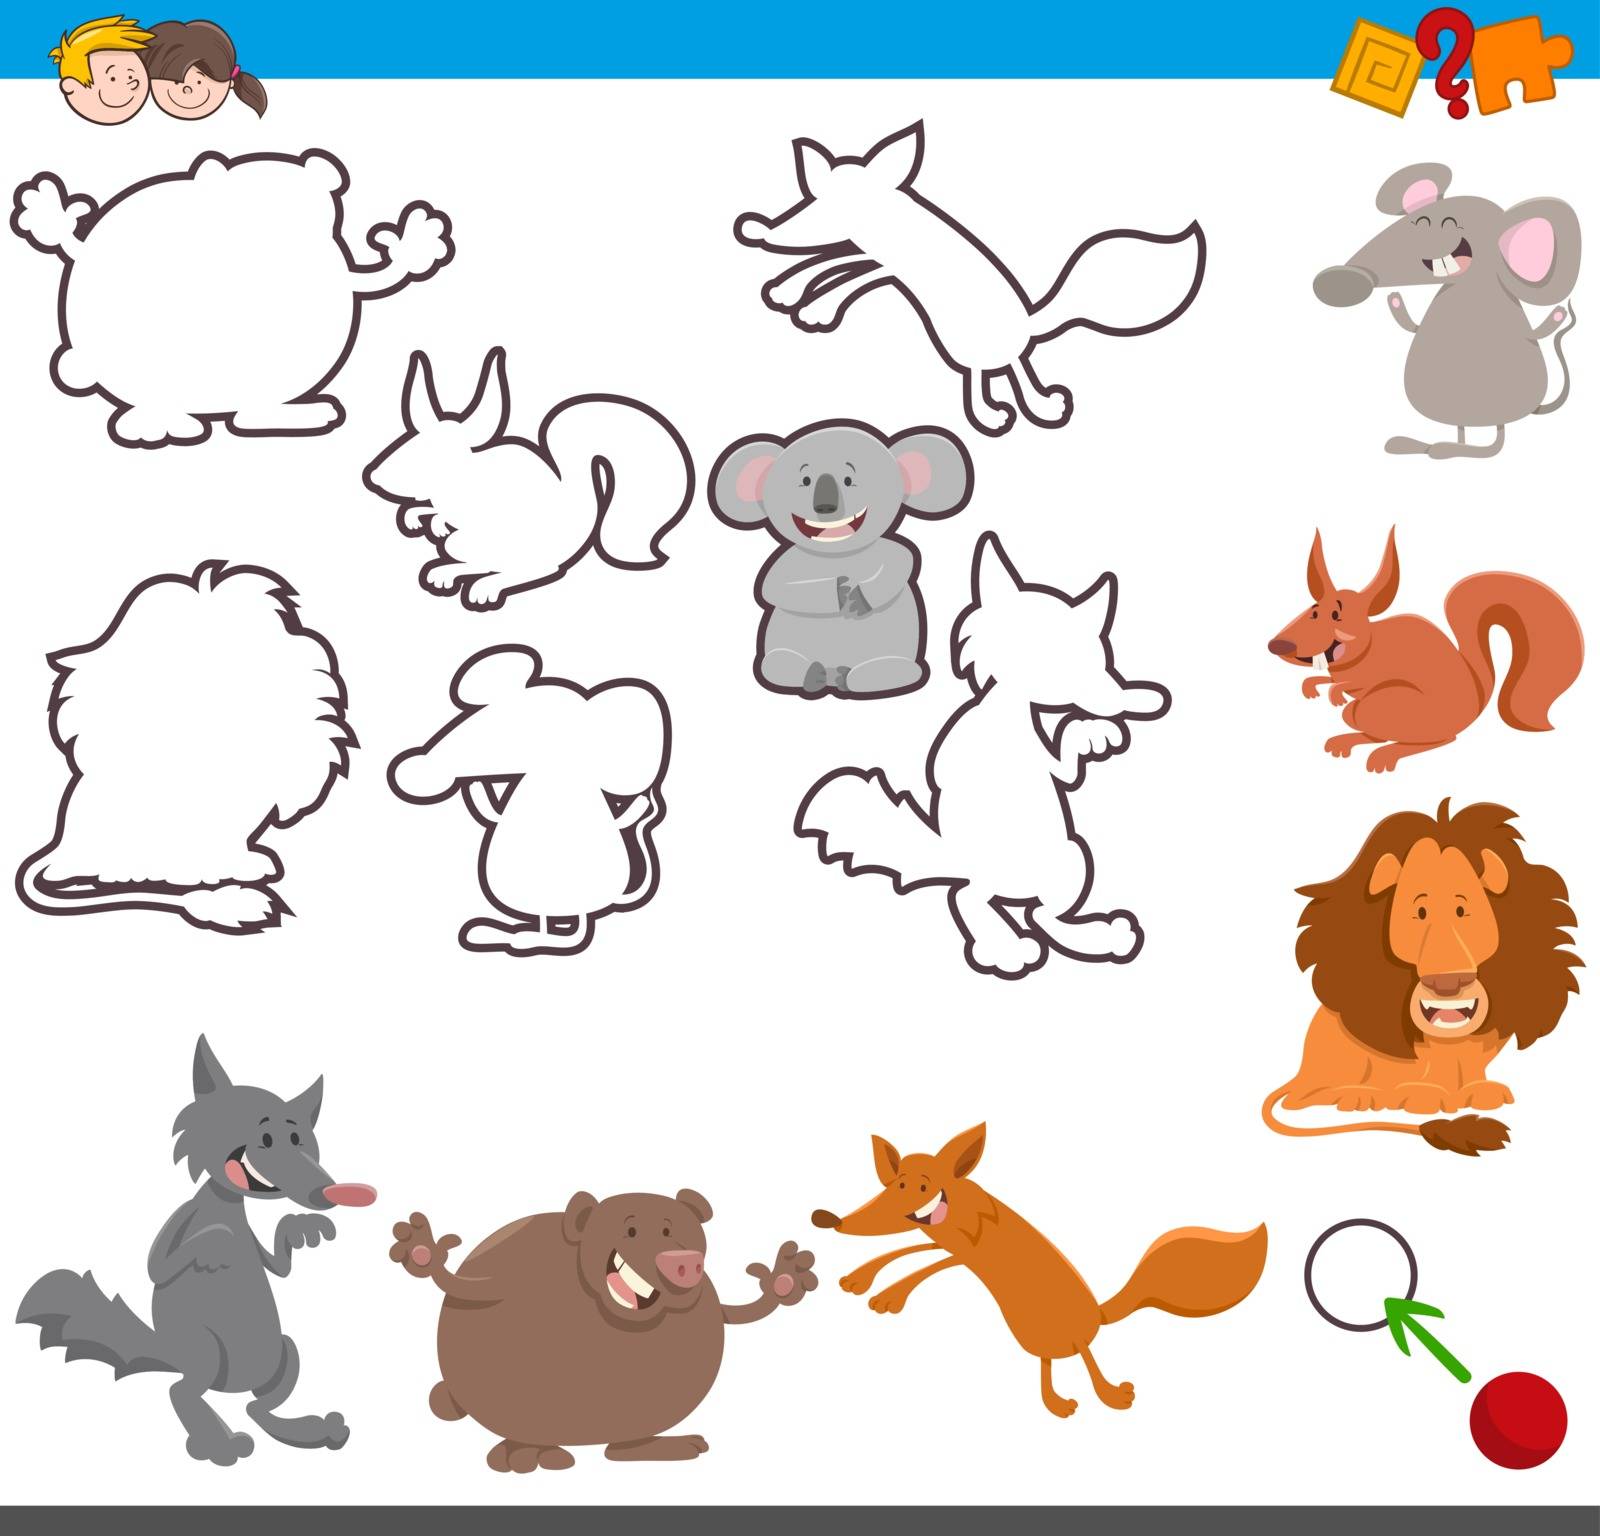 Cartoon Illustration of Educational Activity Game for Children with Cute Animal Characters